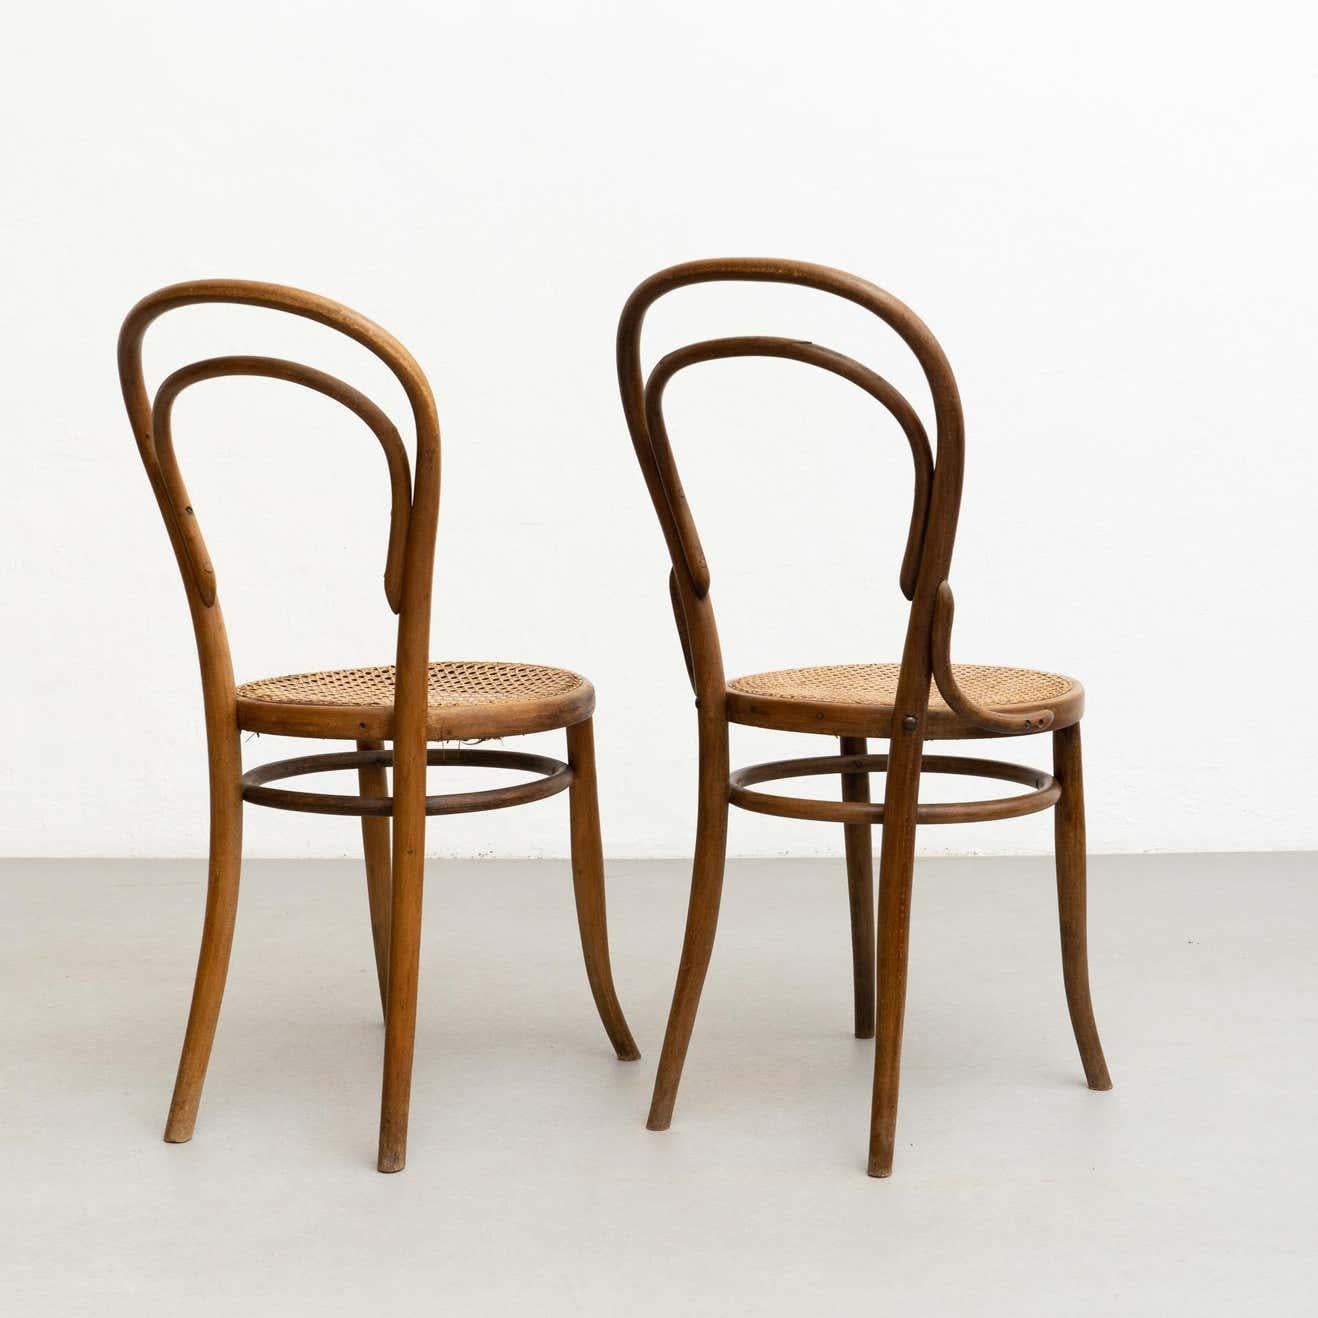 Set of Two J&J Kohn Style Bentwood and Rattan Chairs, circa 1930 In Fair Condition For Sale In Barcelona, Barcelona